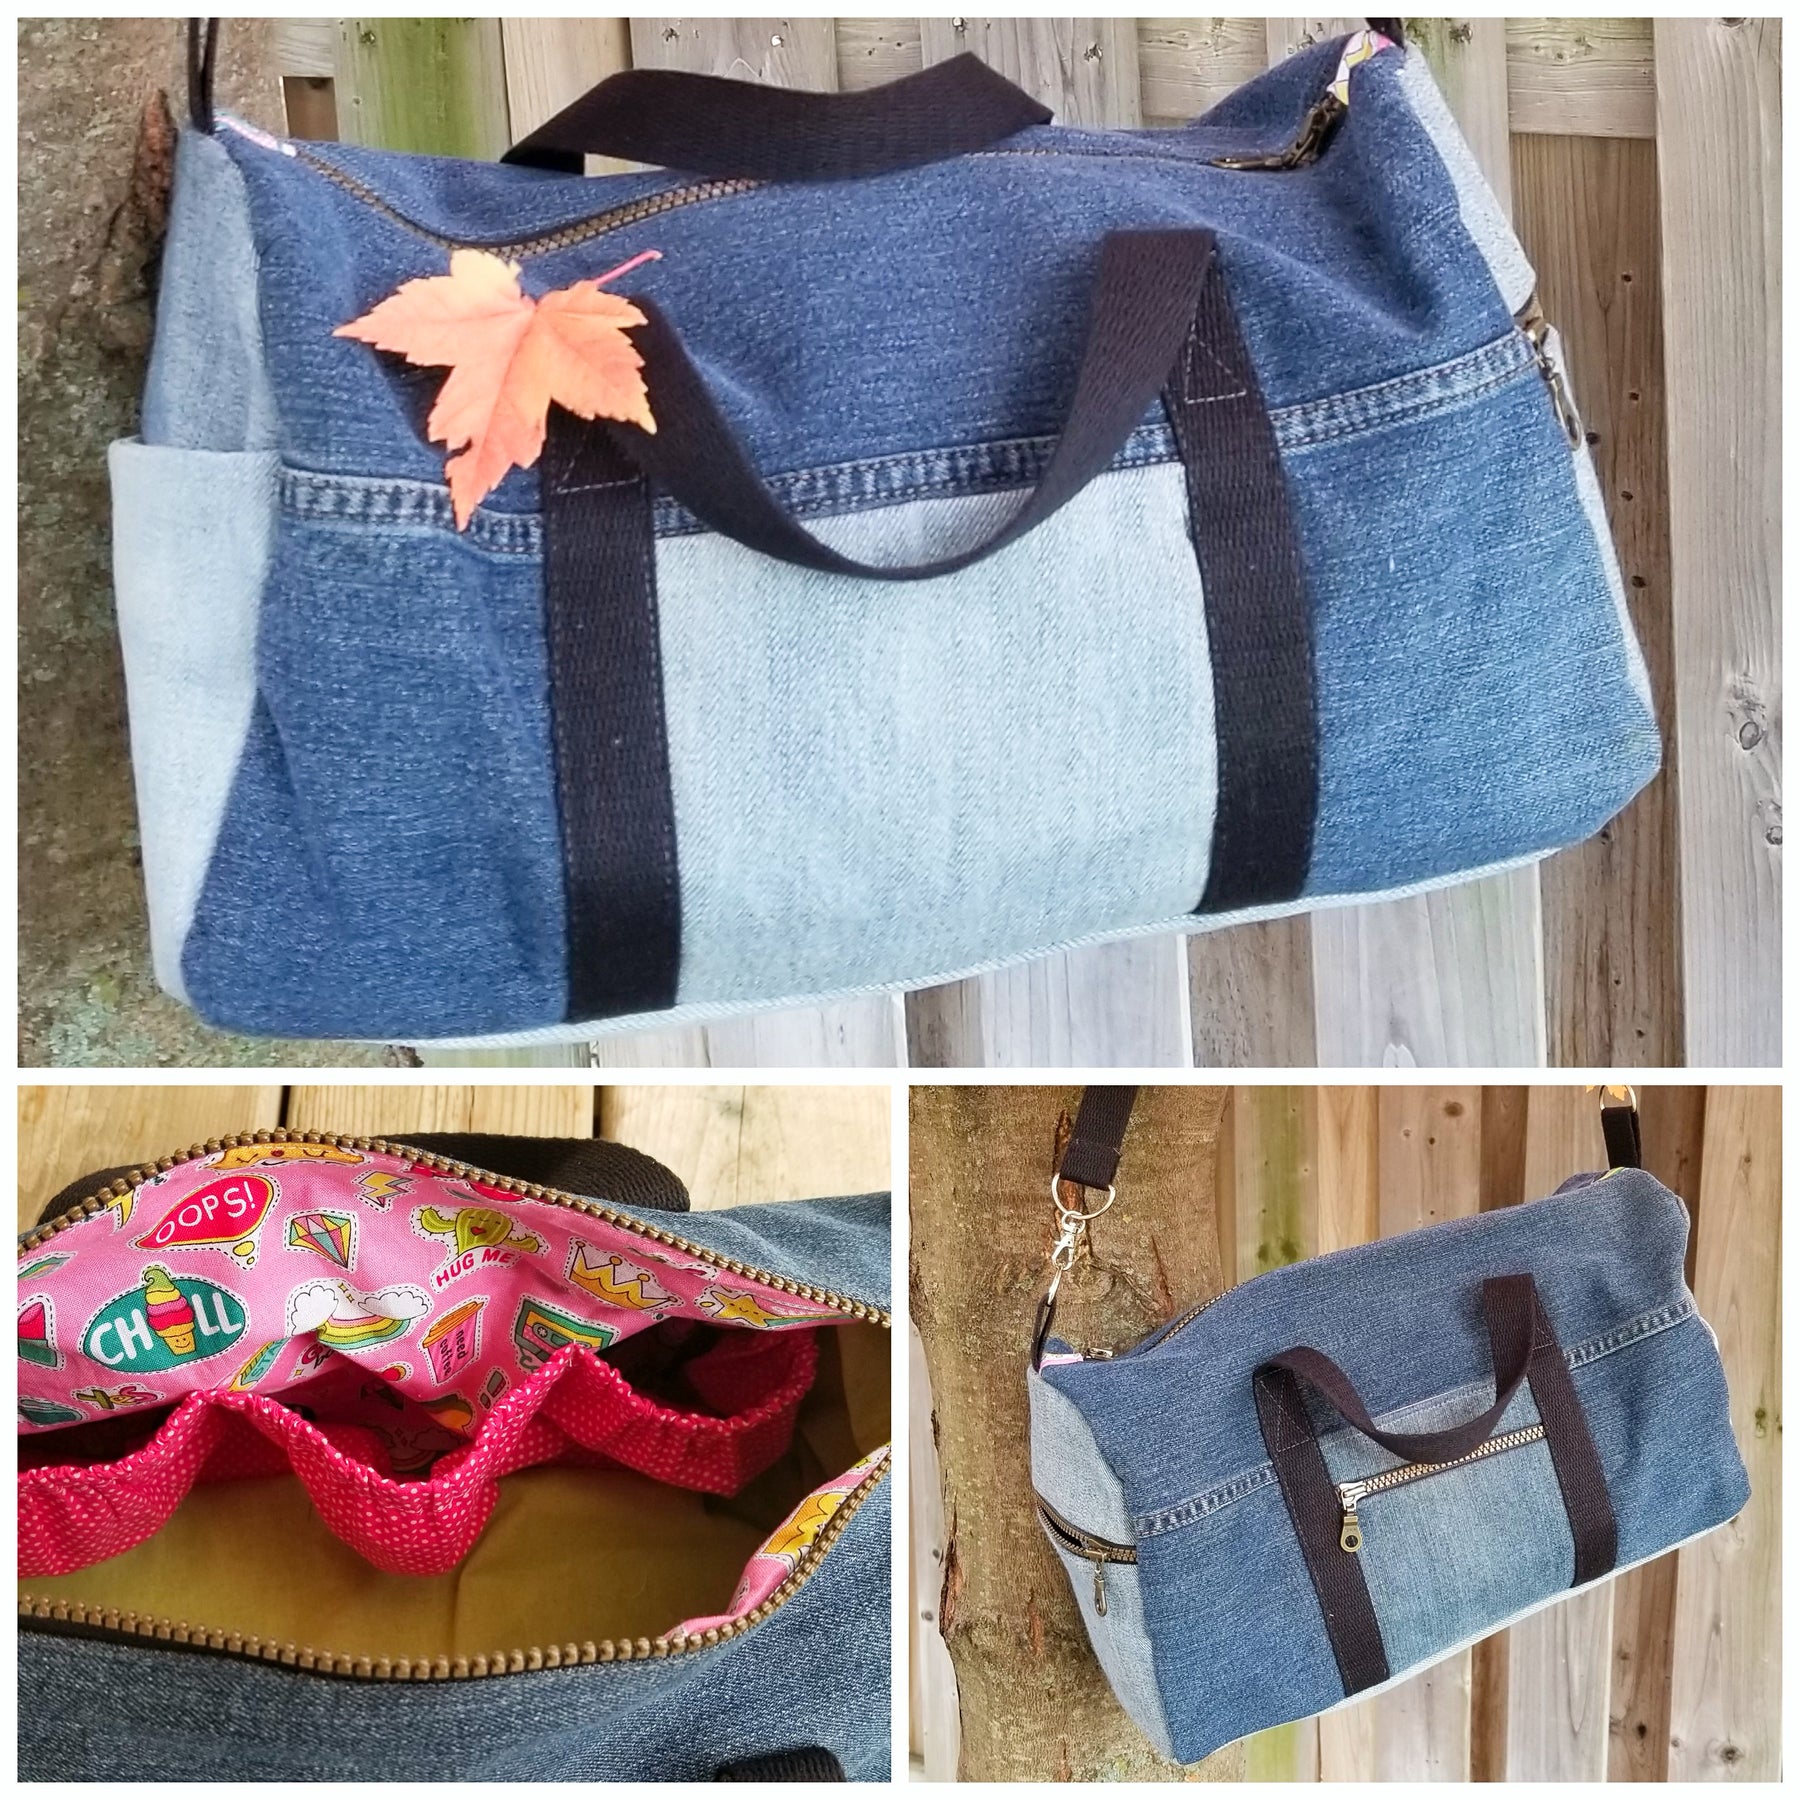 How to Make a Leather Travel Bag DIY- Tutorial and Pattern Download 